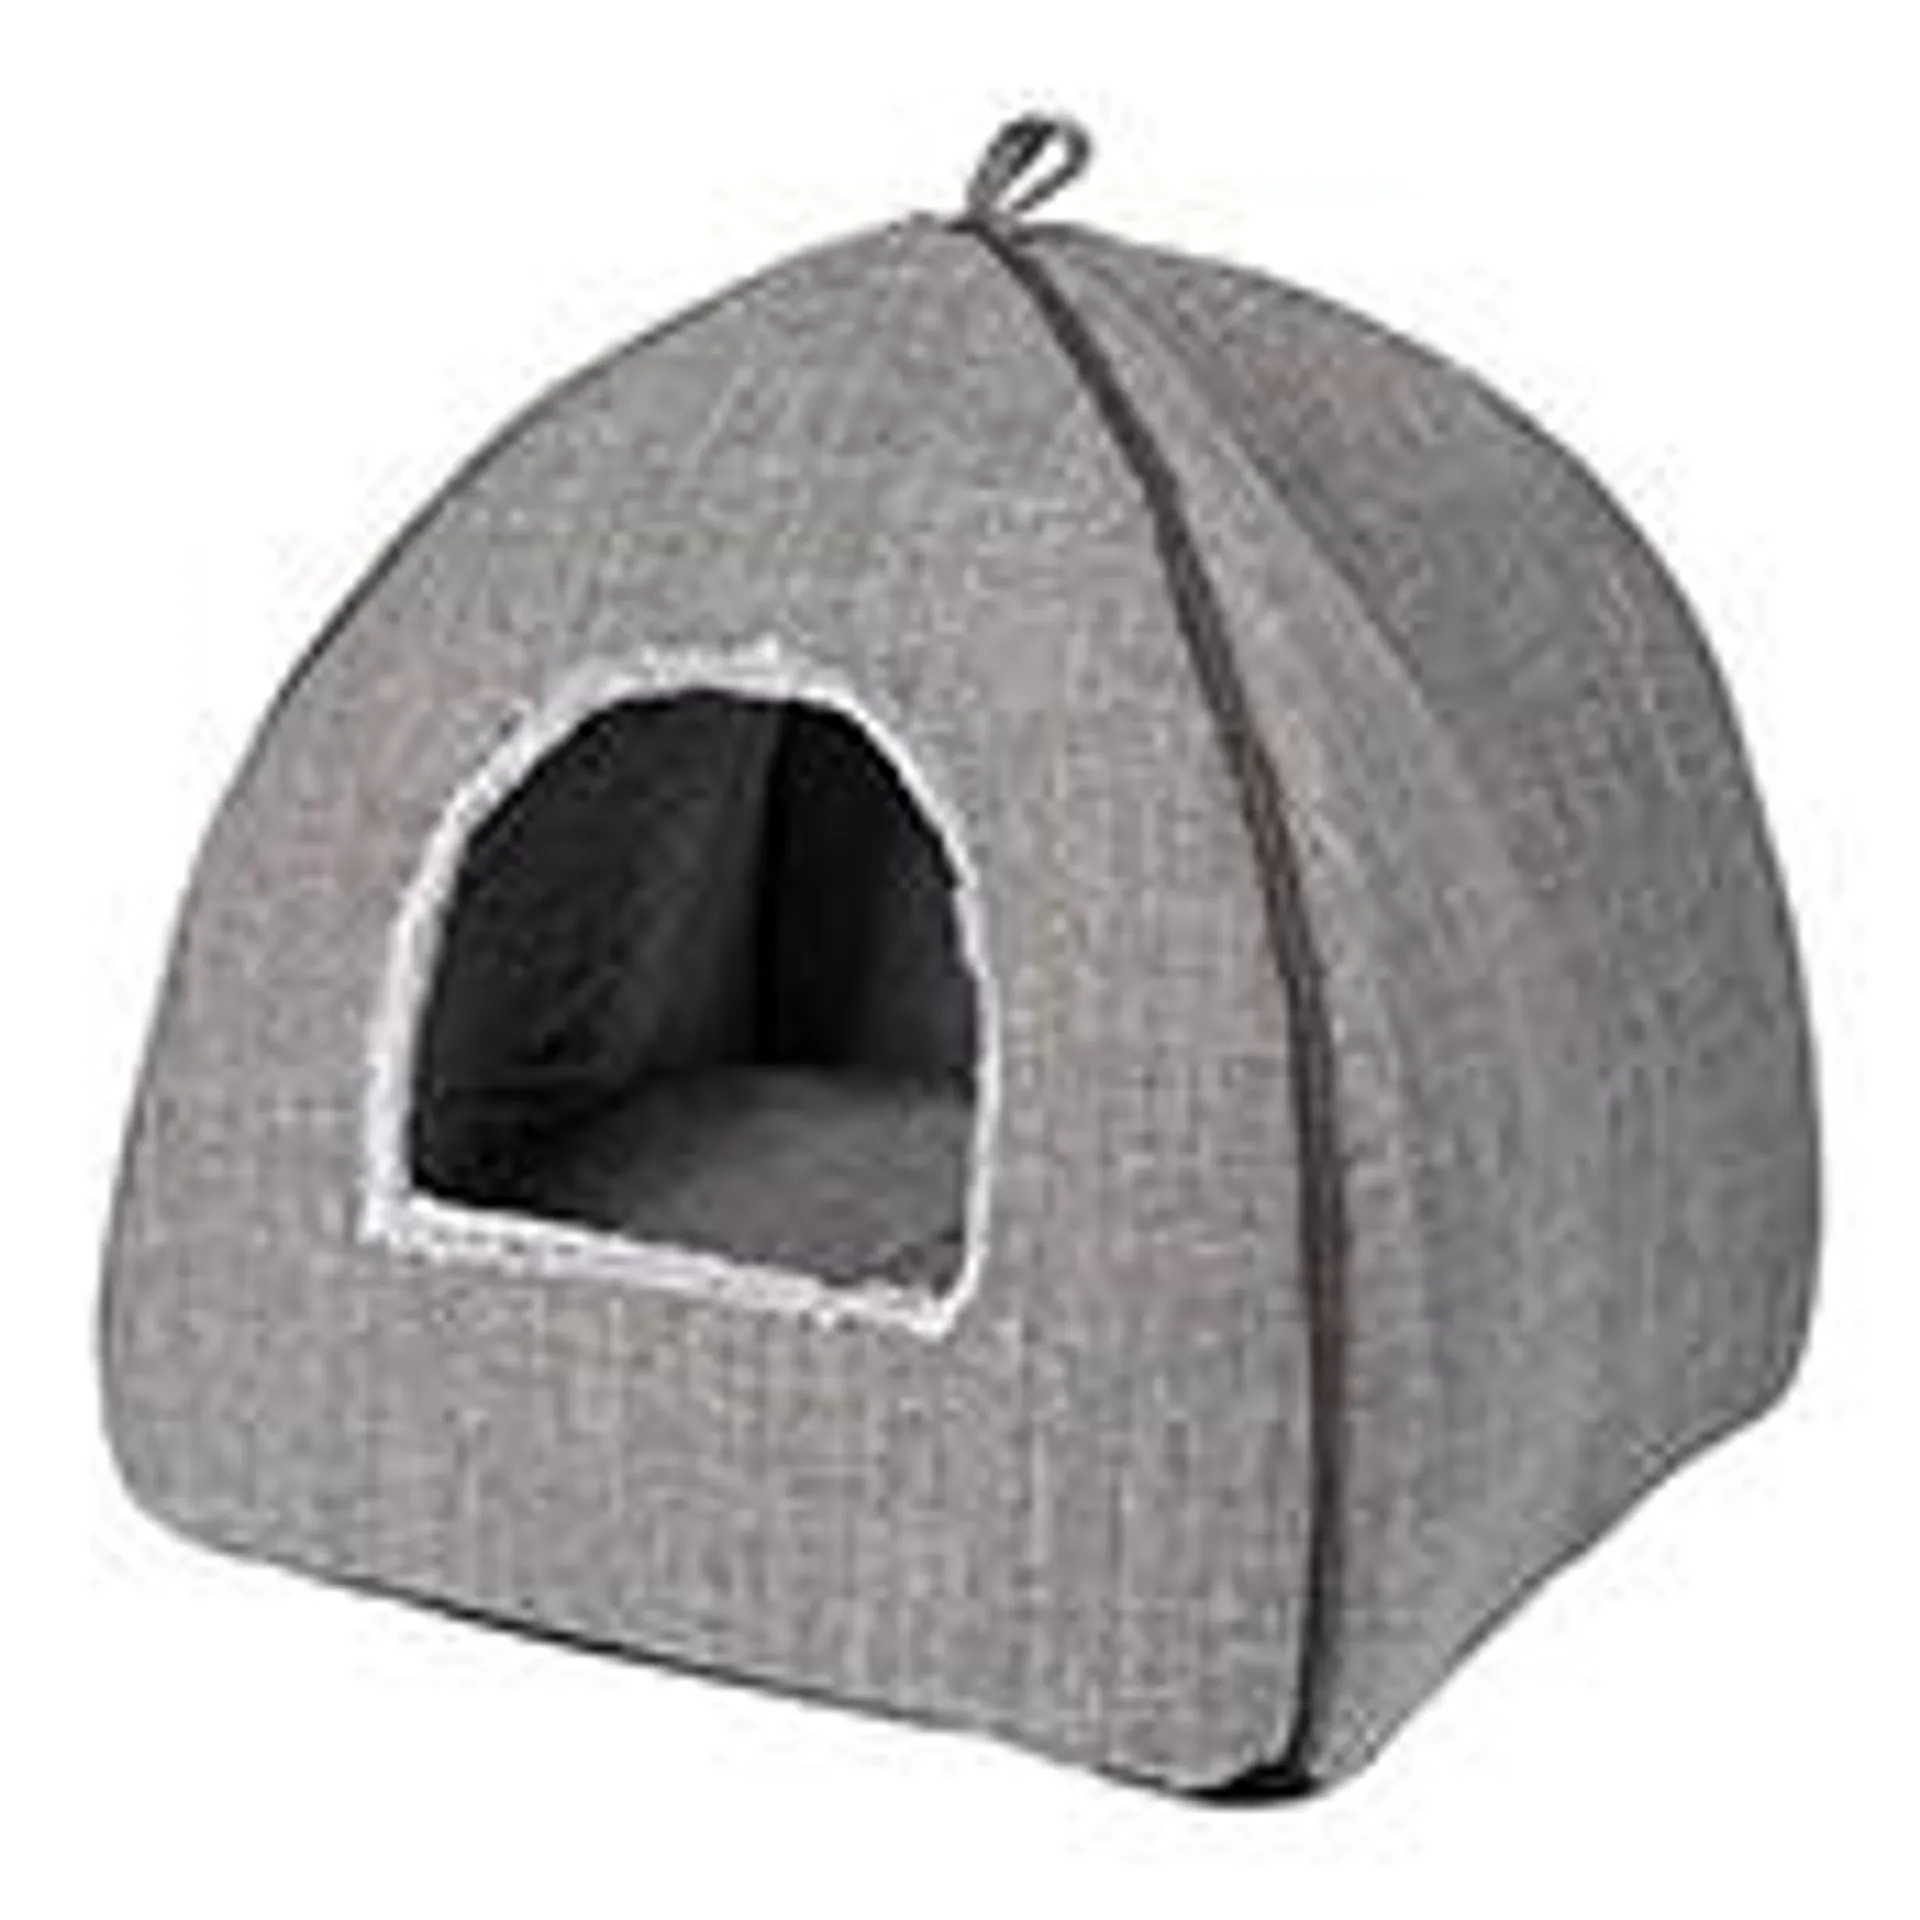 Pets at Home Luxury Igloo Cat Bed Grey